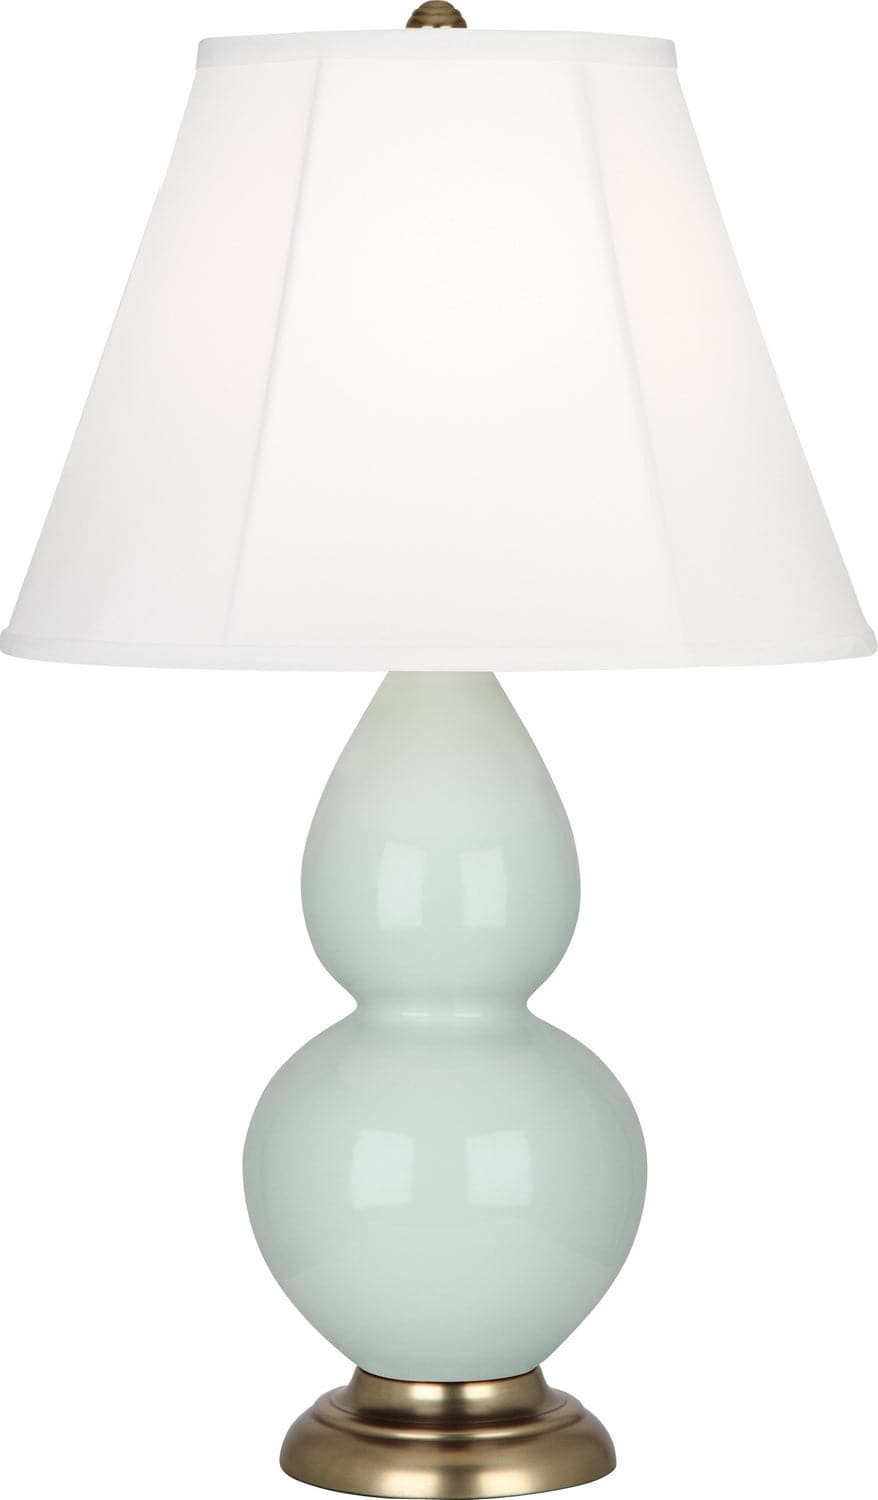 Robert Abbey - 1786 - One Light Accent Lamp - Small Double Gourd - Celadon Glazed